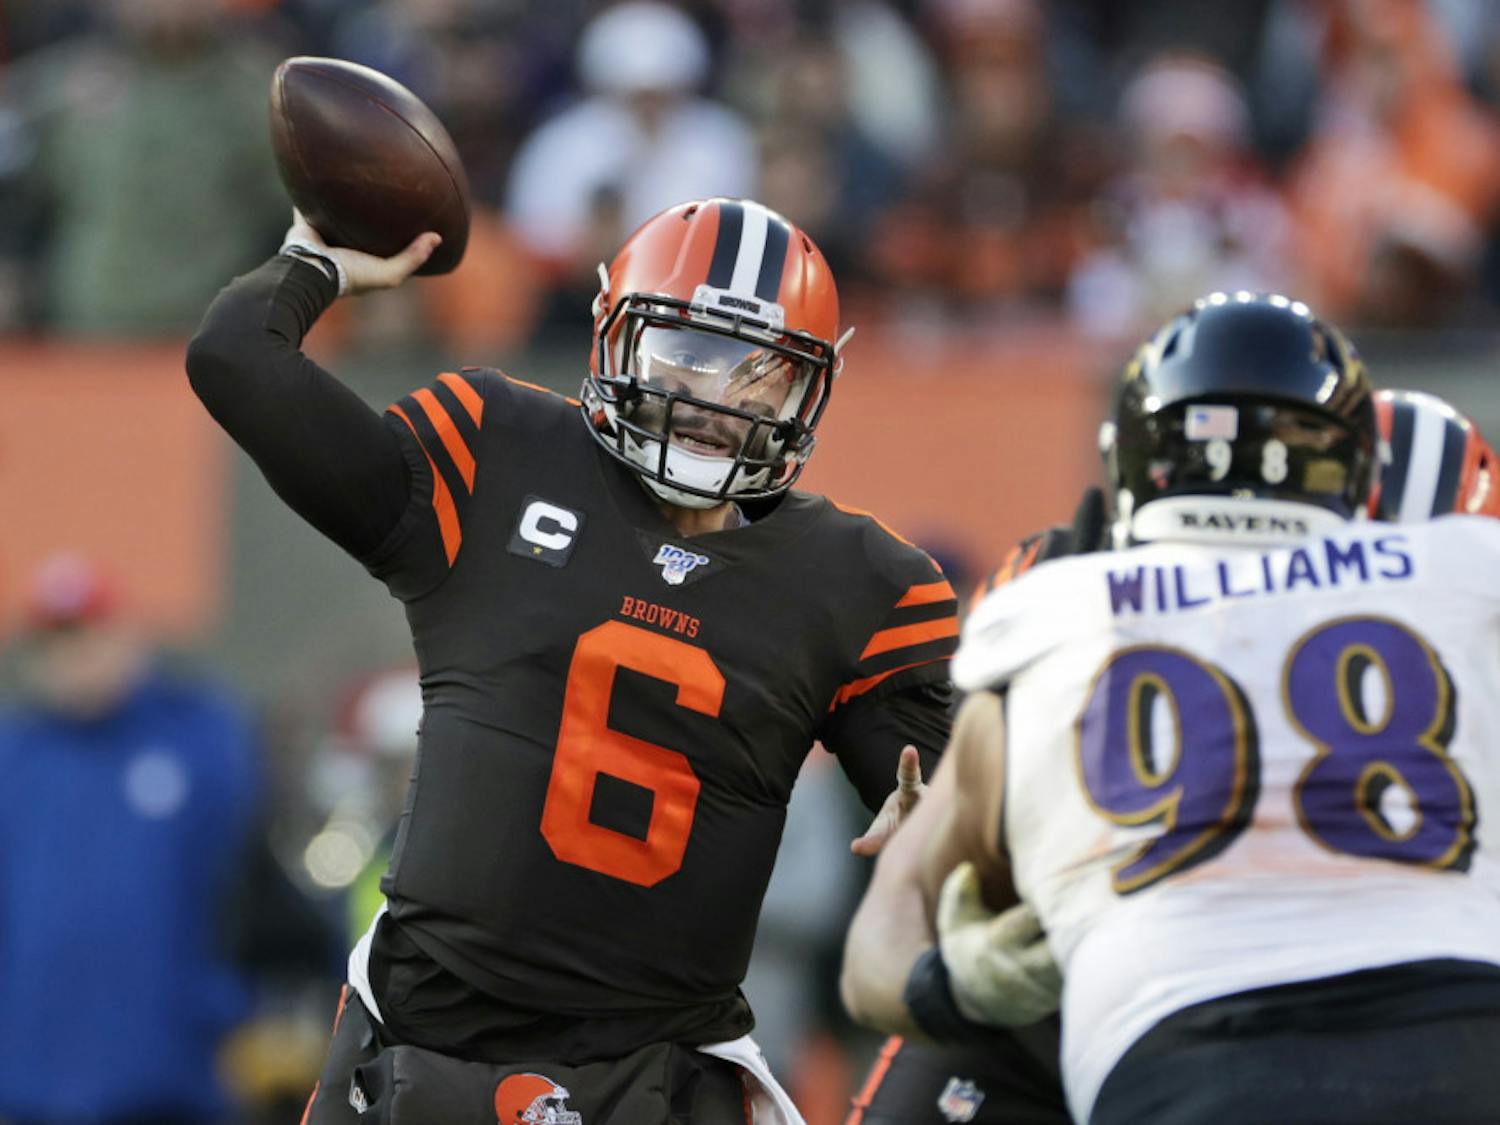 FILE - In this Sunday, Dec. 22, 2019 file photo, Cleveland Browns quarterback Baker Mayfield (6) passes against the Baltimore Ravens during the second half of an NFL football game in Cleveland. Cleveland Browns quarterback Baker Mayfield plans to kneel during the national anthem this upcoming season to support protests of social injustice, police brutality and racism, Saturday, June 13, 2020. (AP Photo/Ron Schwane, File)